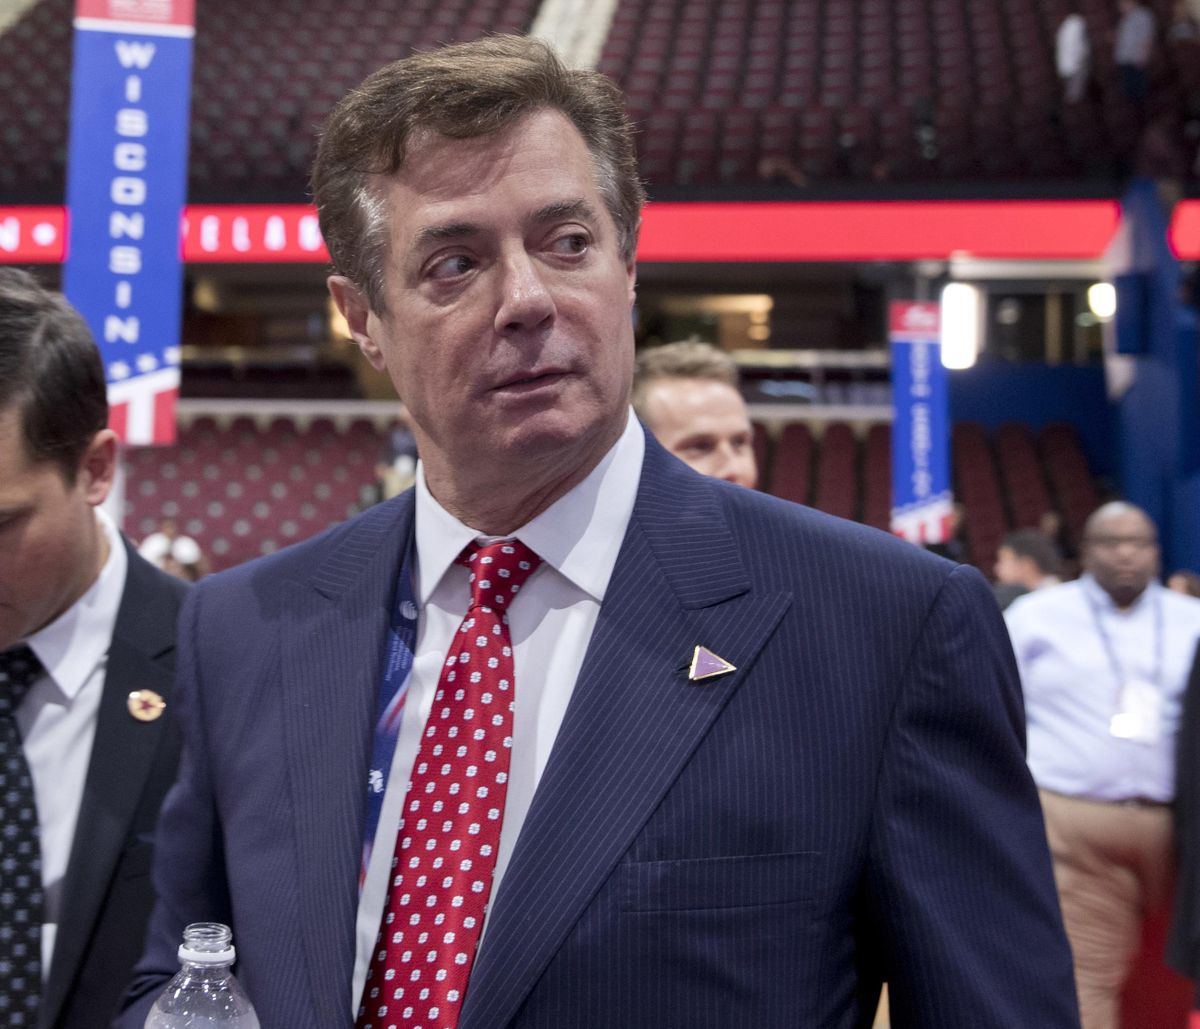 FILE - In this July 18, 2016 file photo, then-Trump campaign chairman Paul Manafort walks around the convention floor before the opening session of the Republican National Convention in Cleveland. (Carolyn Kaster / AP)